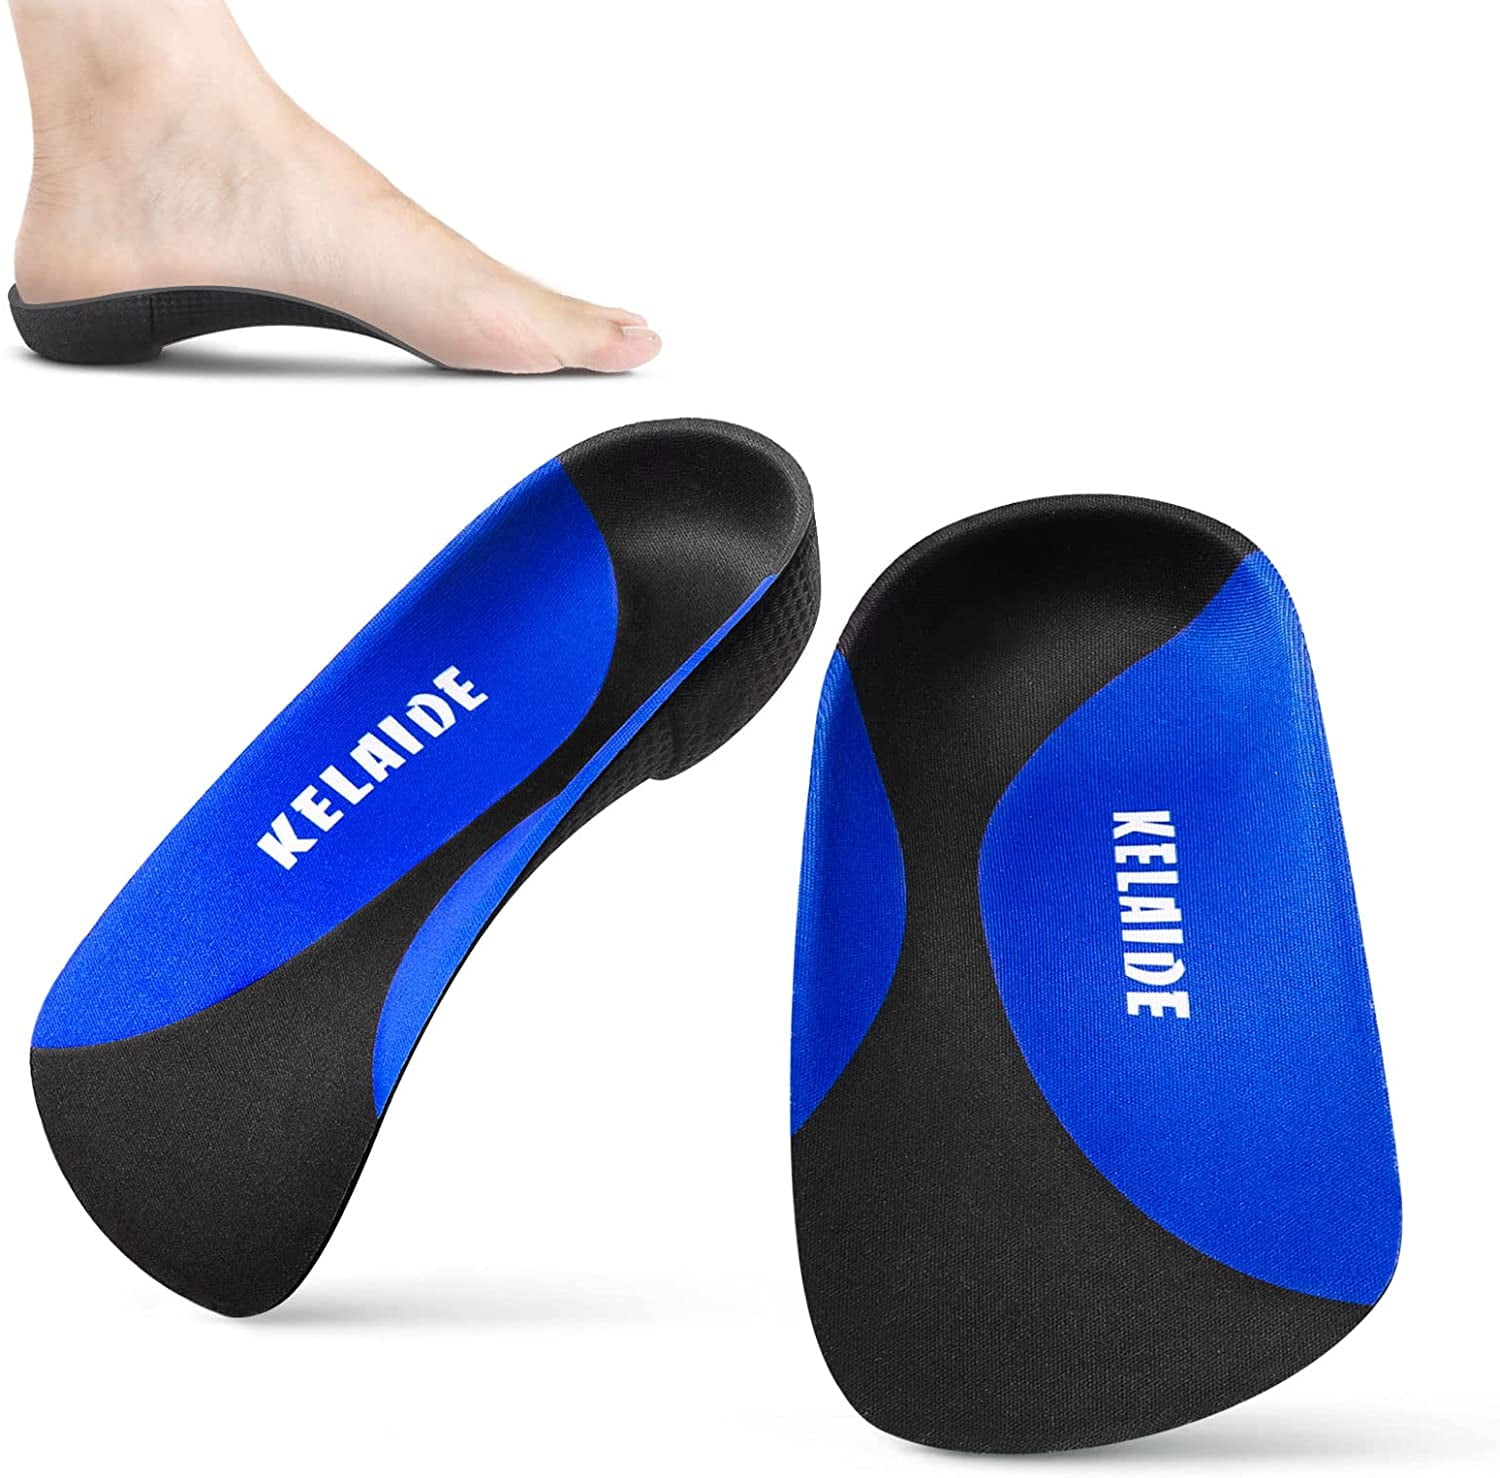 FOOTACTIVE NHS Approved Full Length Medical Grade Orthotic Insoles for Effective Relief from Heel Pain Plantar Fasciitis and Flat Feet Orthotic Arch-Support Insoles 